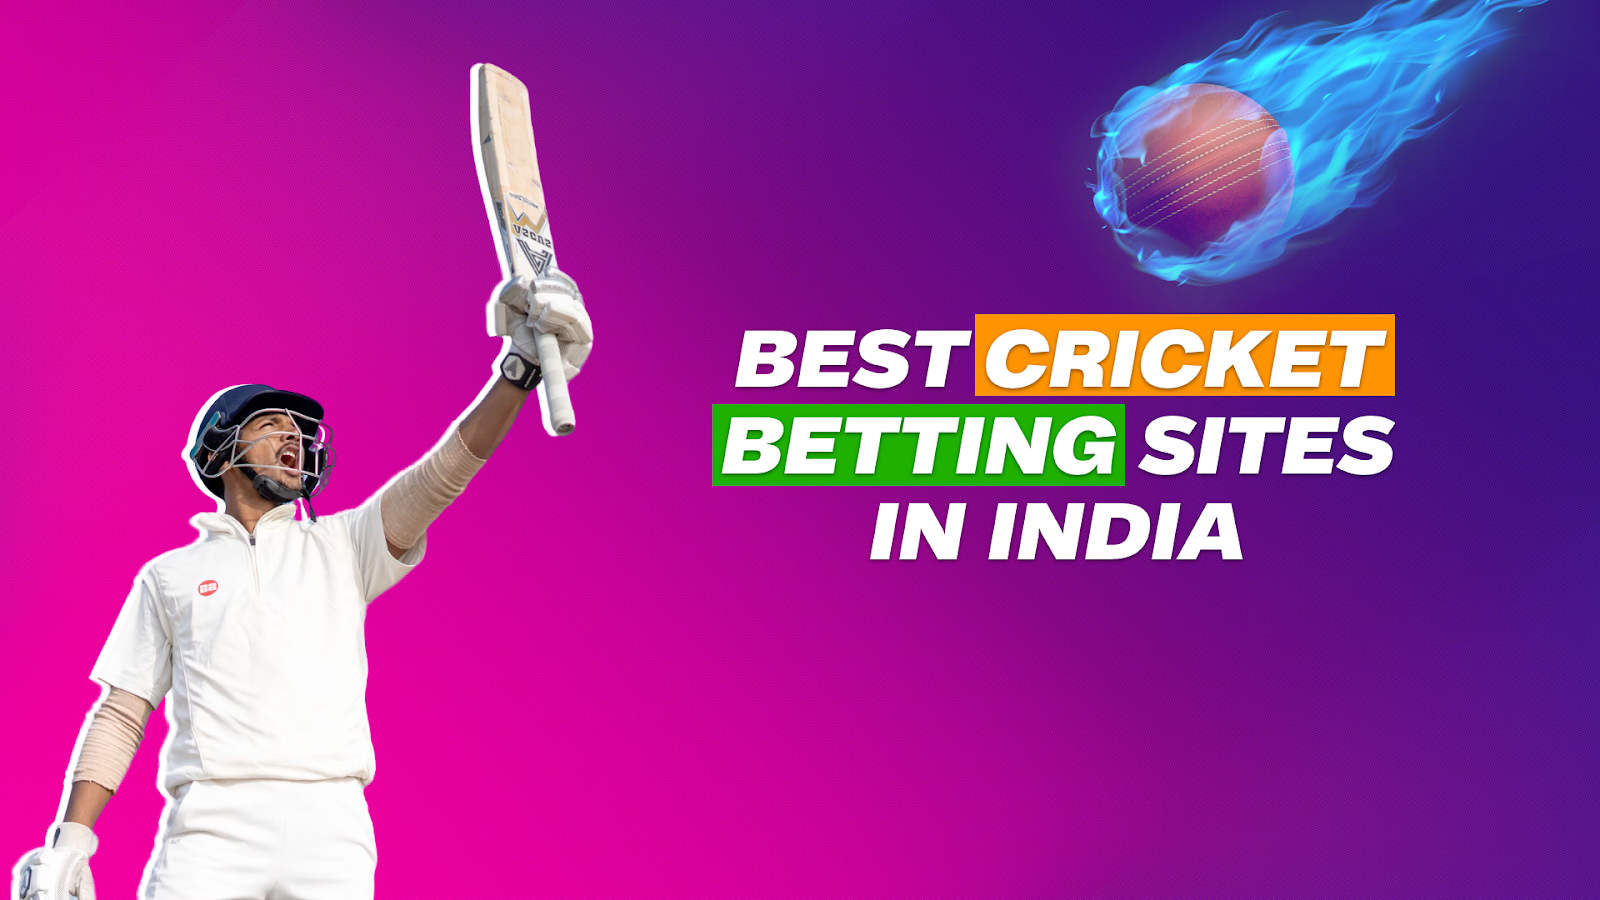 Best cricket betting sites in India